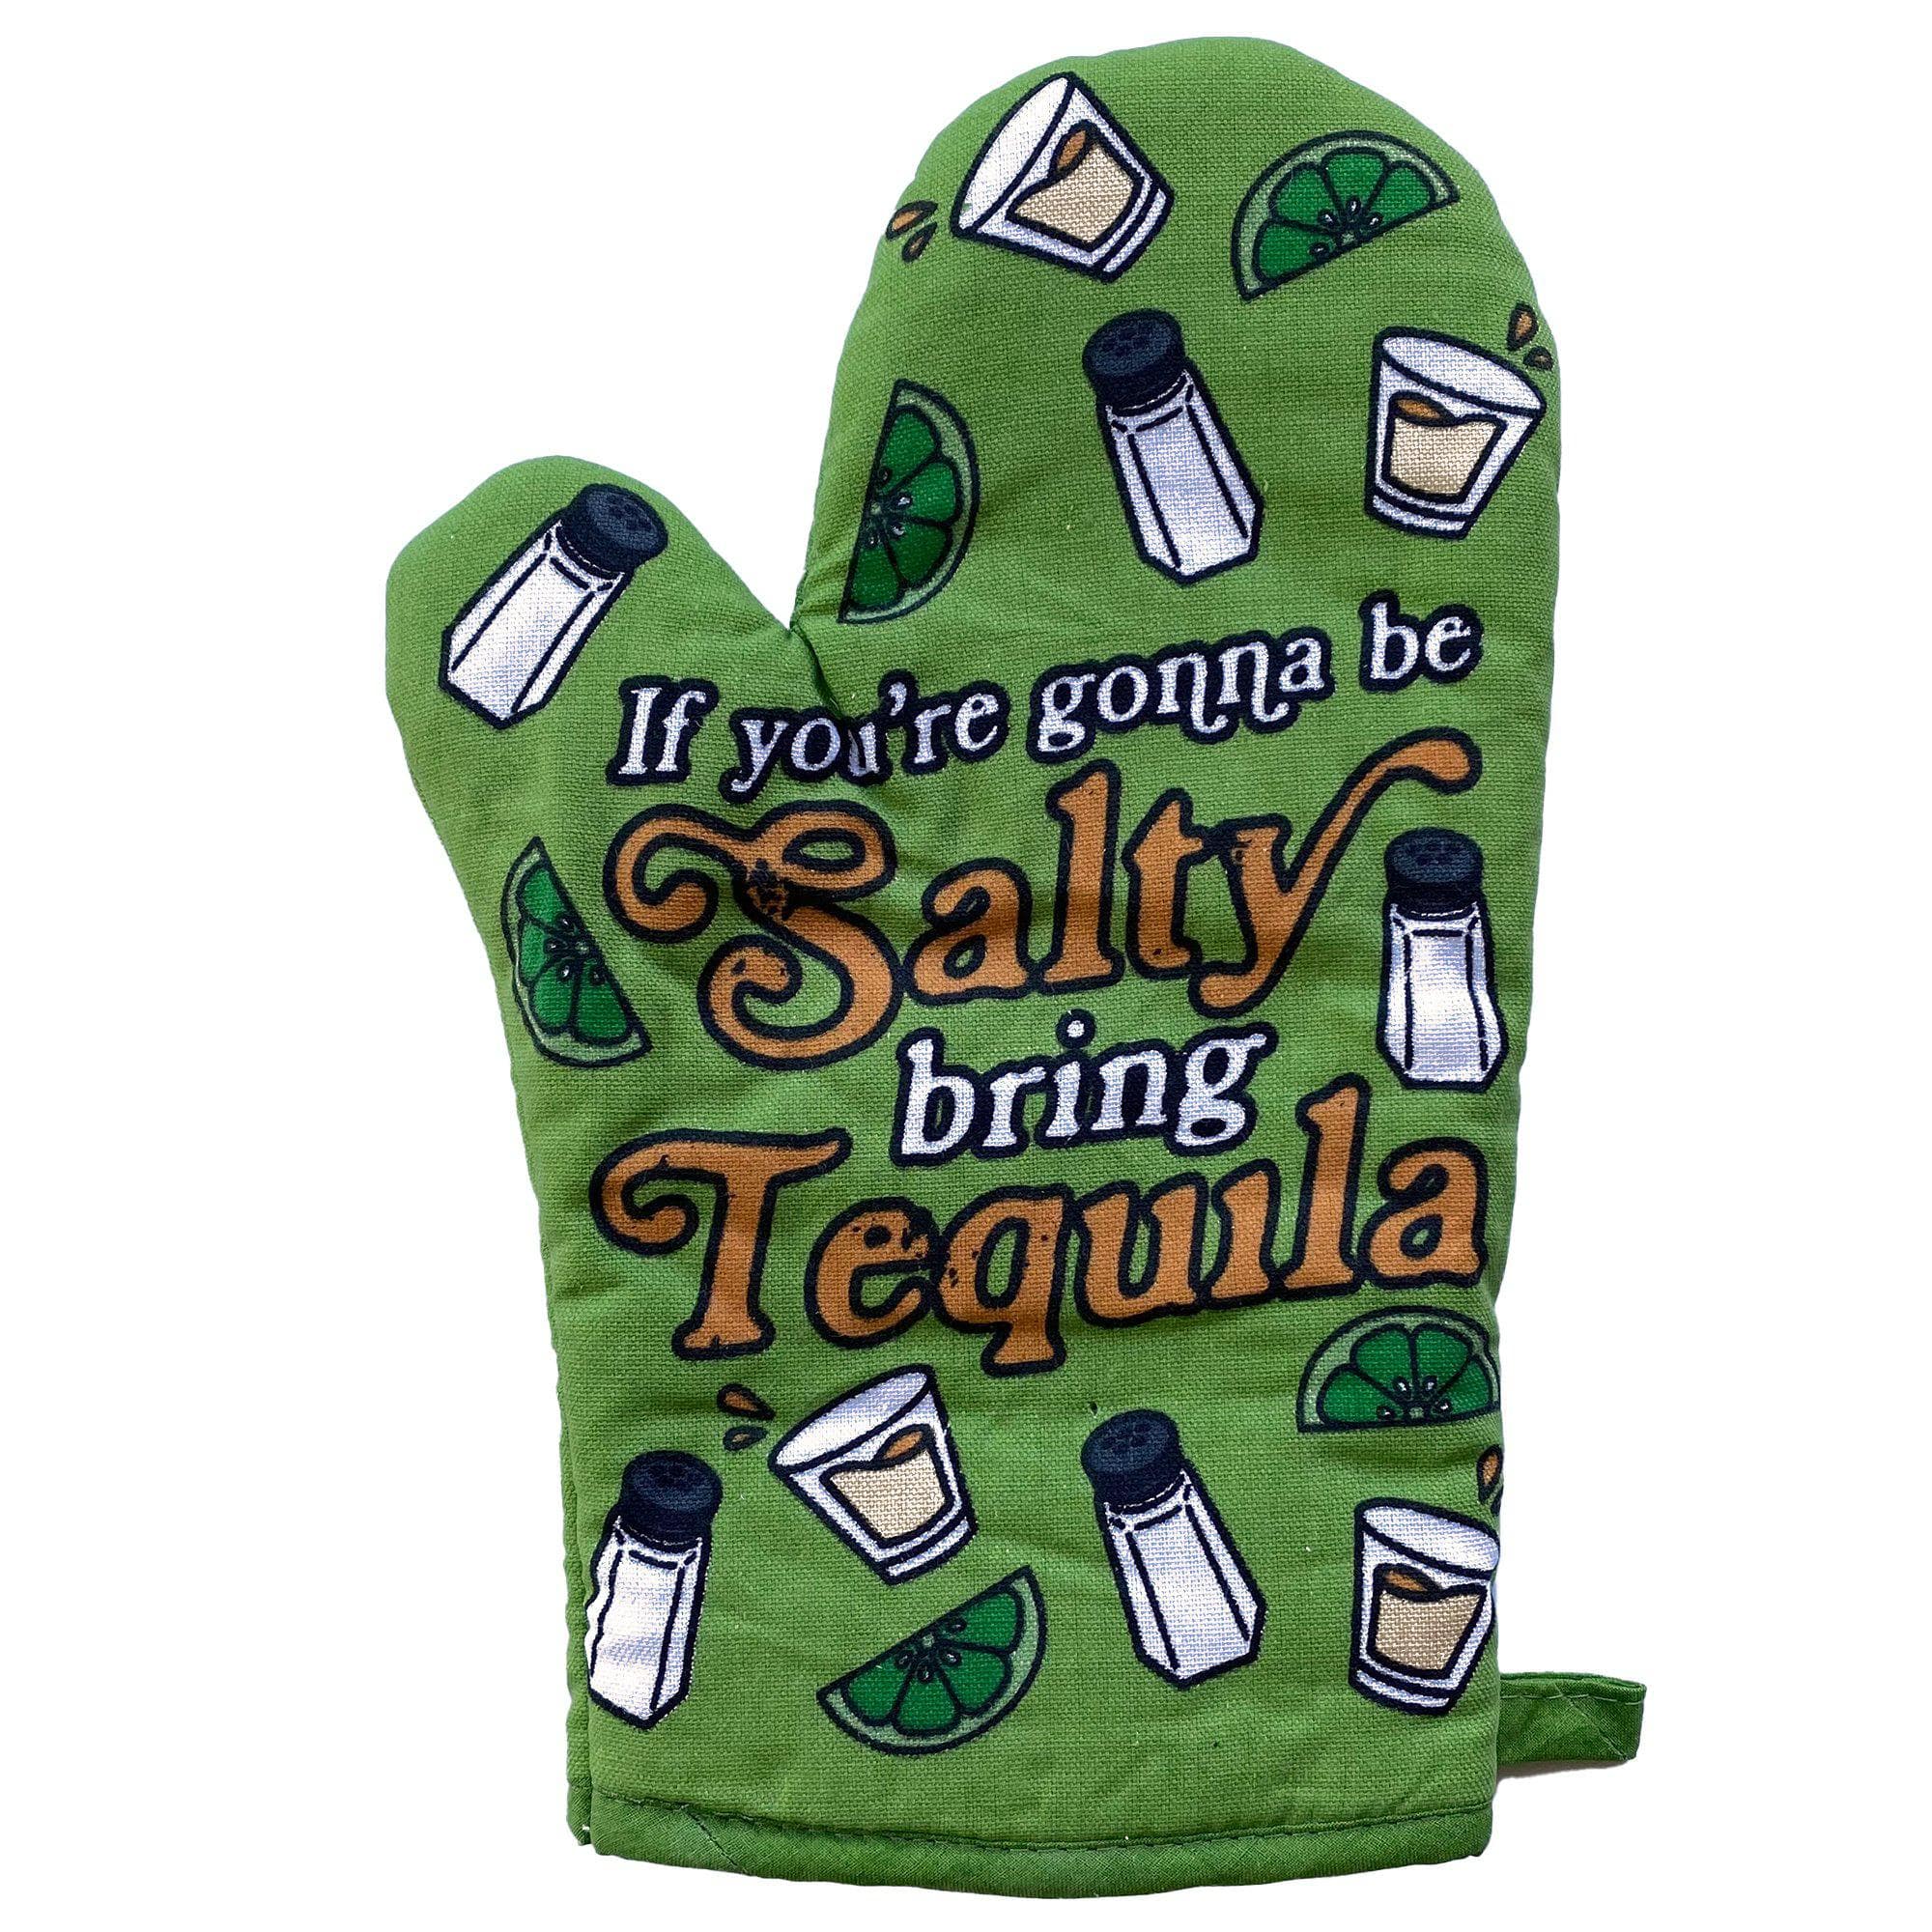 If You're Going To Be Salty Bring Tequila Oven Mitt - Crazy Dog T-Shirts